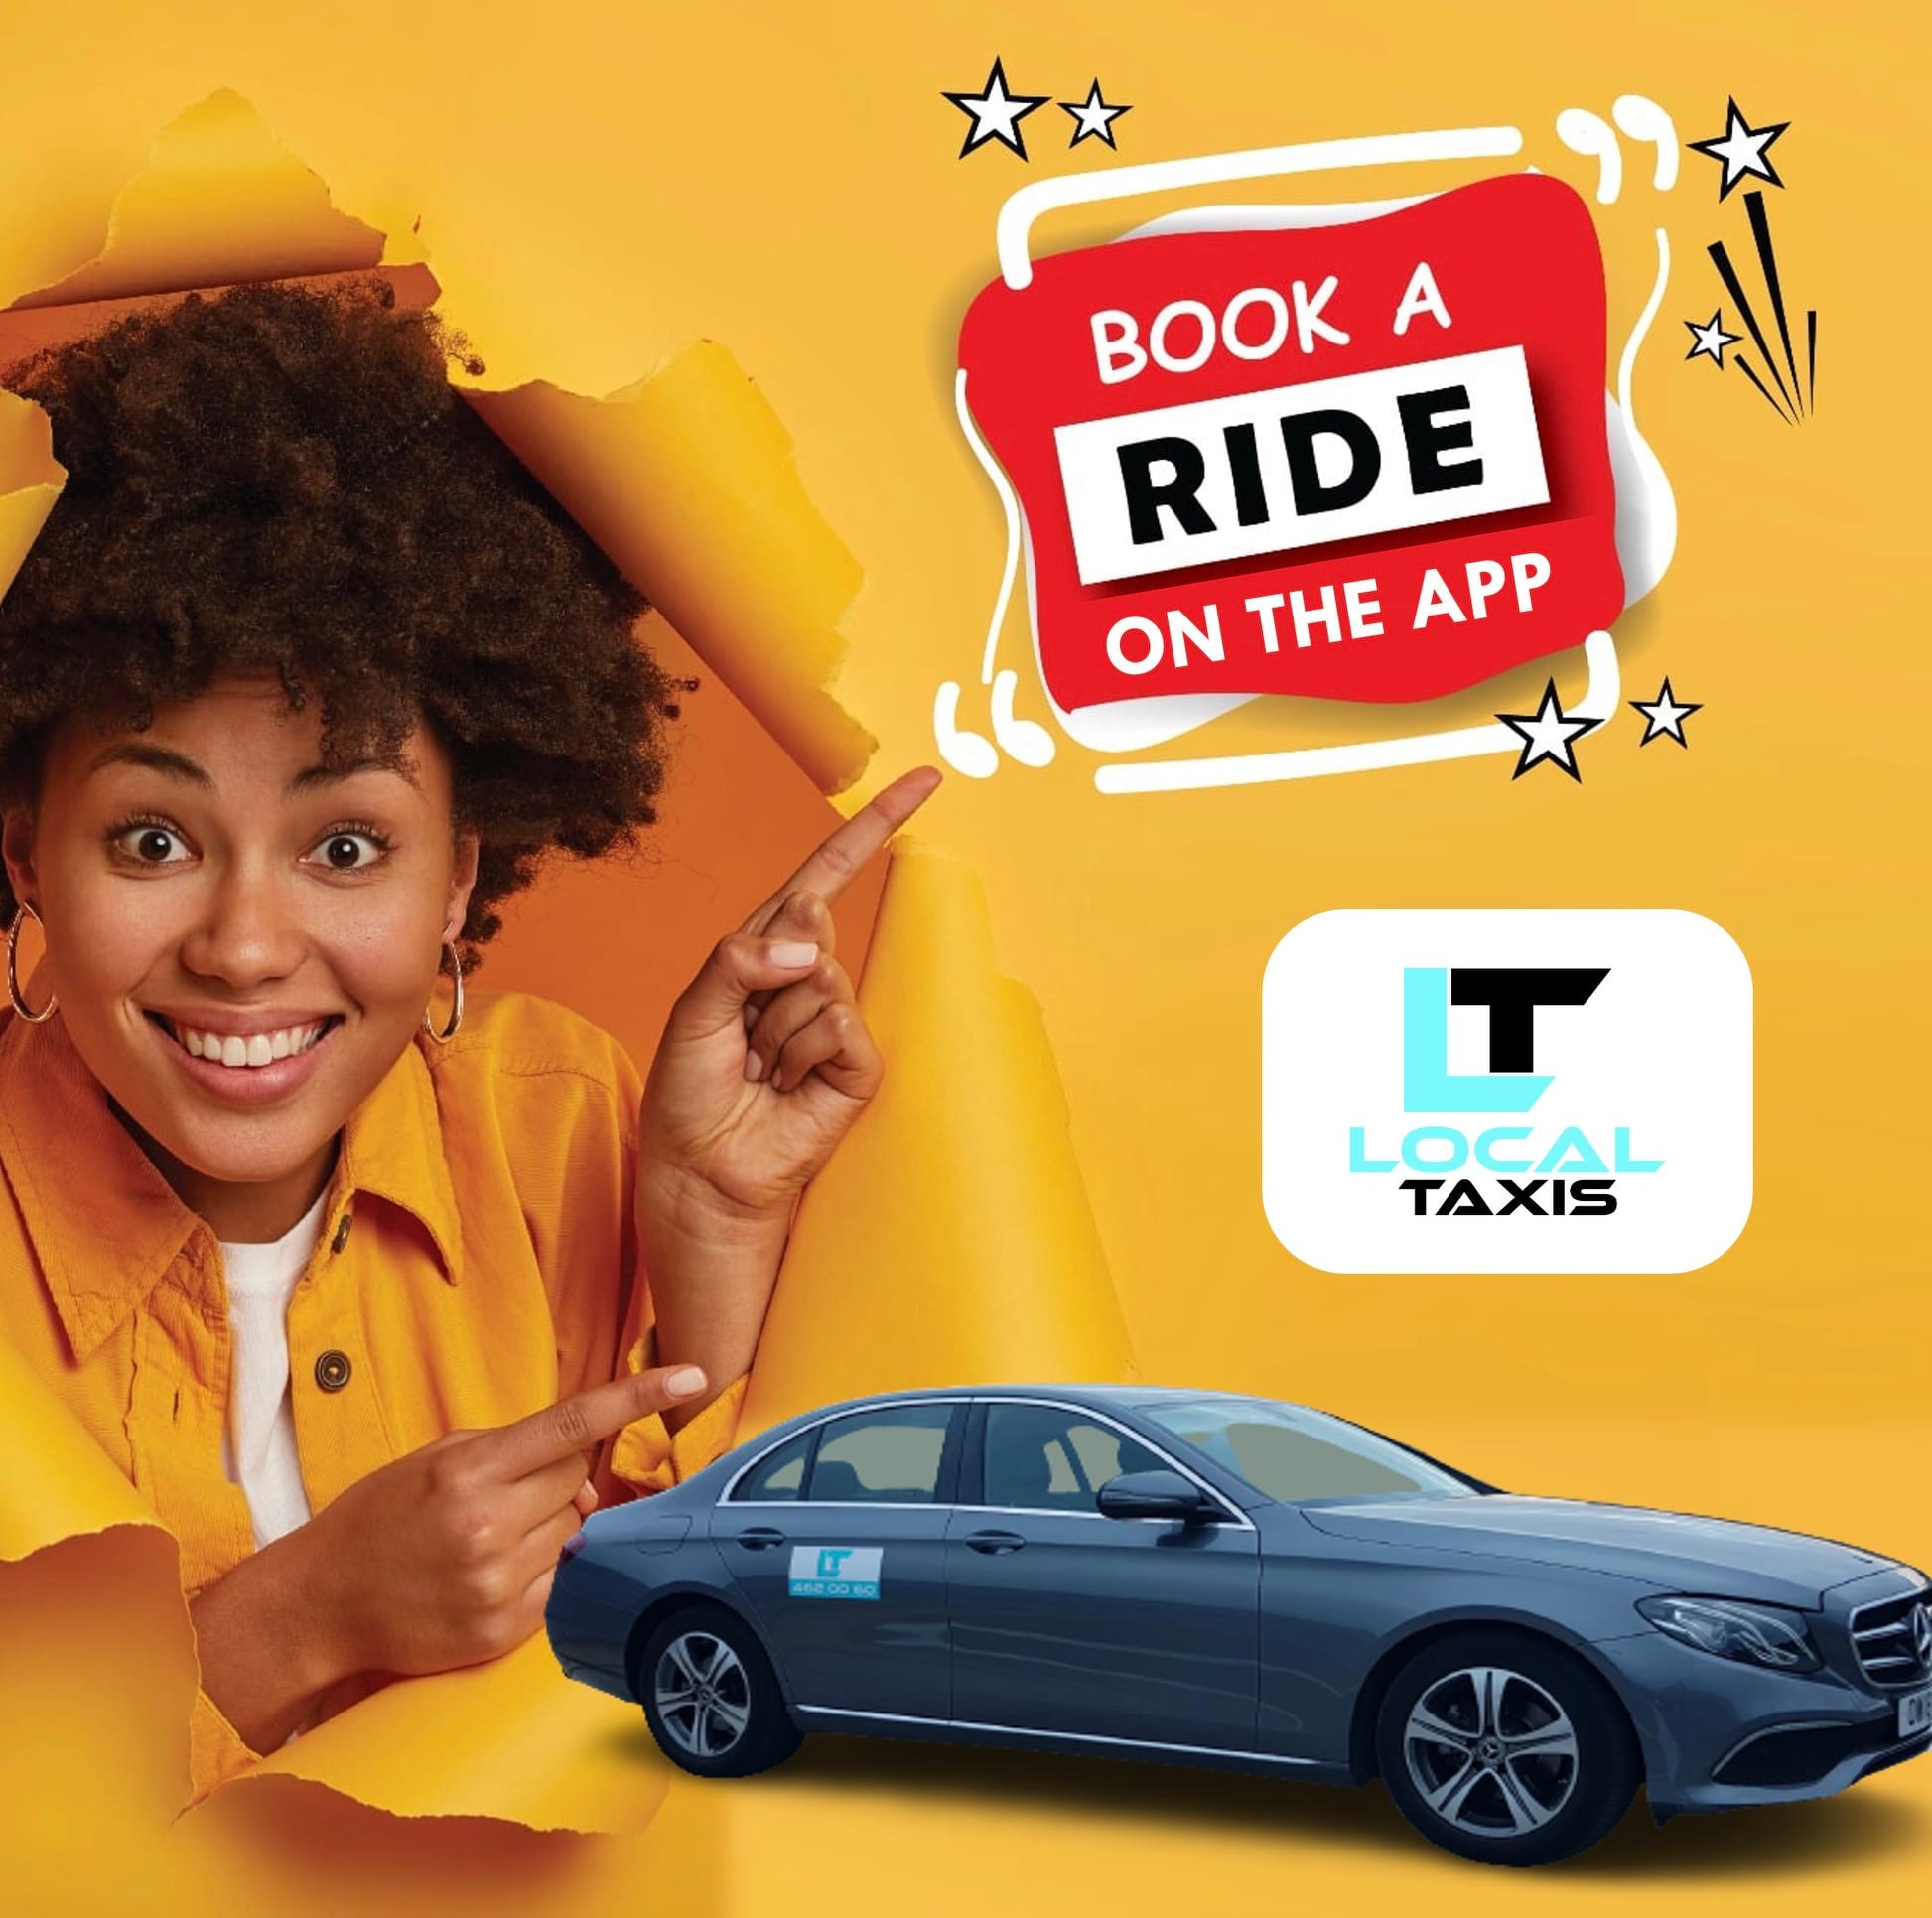 Book a ride on the app - Local Taxis Hexham